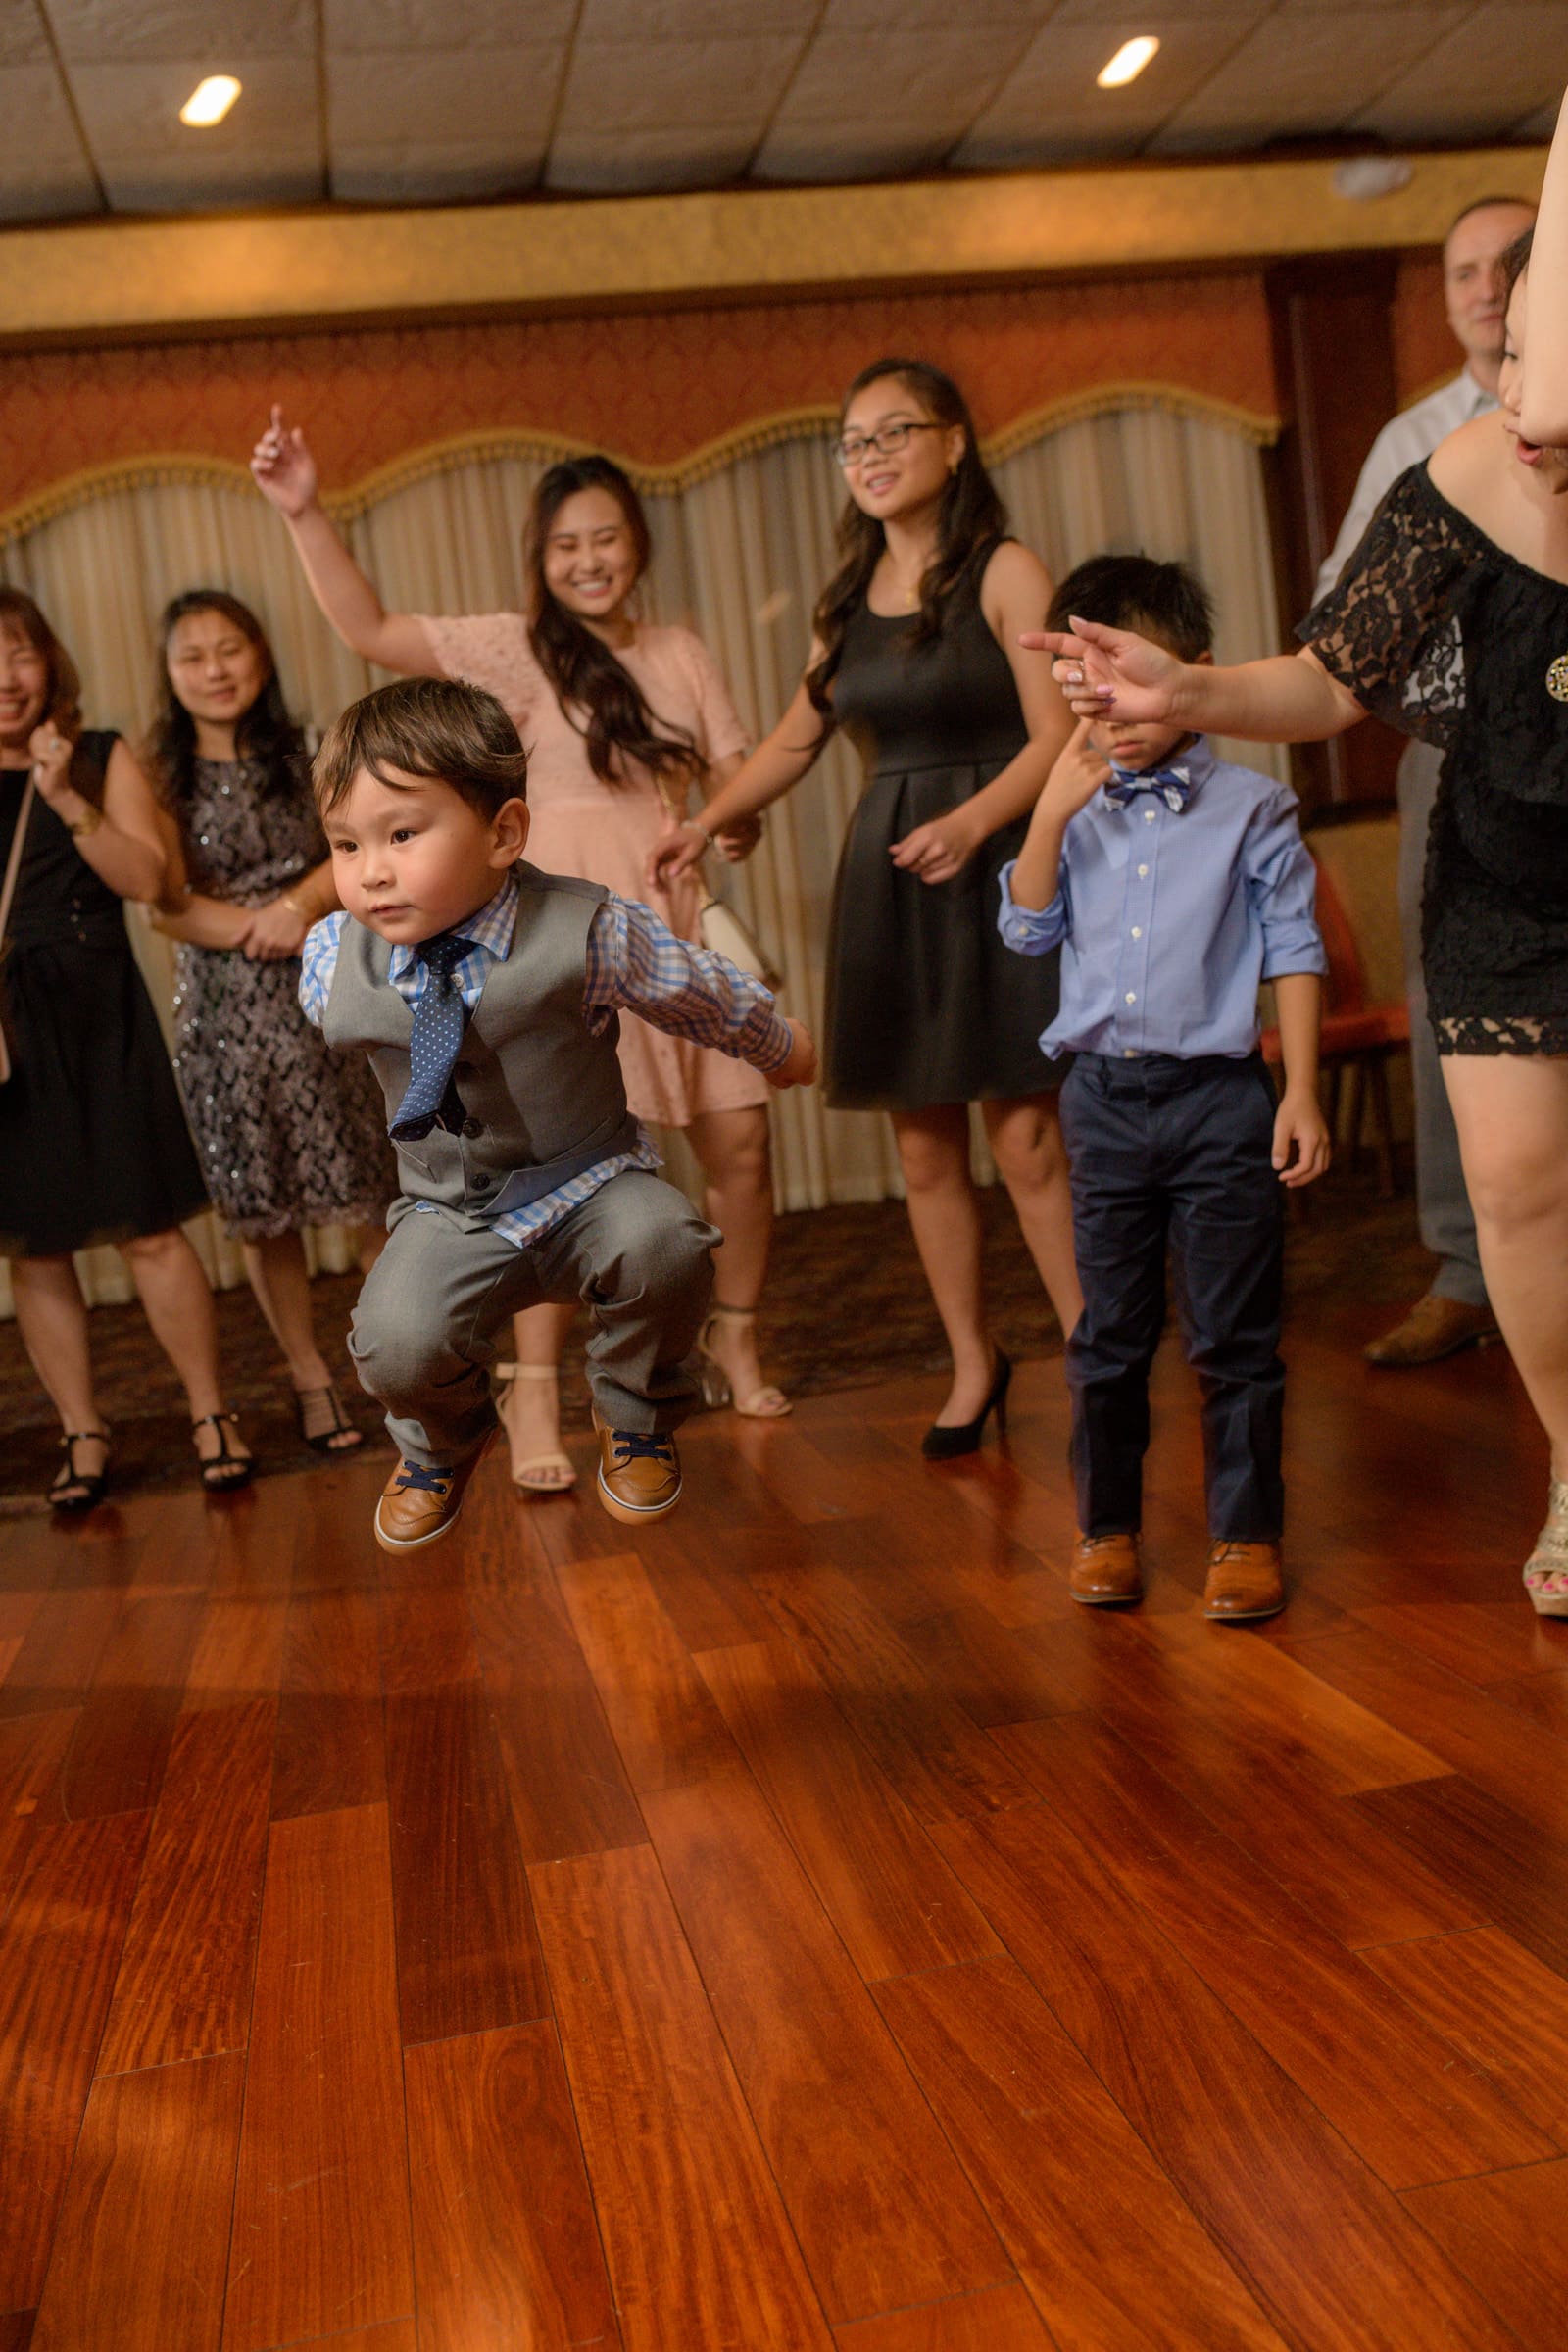 Captured by the talented team at Chris Spicks Photography, a Houston wedding photographer, this image is vibrant with the joy and energy of a wedding celebration. It features a lively moment on the dance floor with young children fully immersed in the festivities.  In the center of the frame, a young boy in mid-jump steals the spotlight. He's sharply dressed in a blue shirt with a matching vest and tie, complete with rolled-up sleeves and stylish shoes, exuding the carefree spirit and excitement of the occasion. His expression is one of pure concentration and delight as he dances.  Beside him stands another boy, slightly older, dressed in a smart blue shirt and navy pants. He appears more reserved, perhaps momentarily overwhelmed by the bustle around him, shielding his eyes from the flash of the camera or the lights of the dance floor.  The background is filled with guests of varying ages, all participating in the dance. Their blurred movements suggest the rhythm and pace of the music, adding to the dynamic atmosphere of the scene. The warm tones of the wooden floor and the soft, ambient lighting contribute to the inviting ambiance.  This photo exemplifies Chris Spicks Photography's ability to capture candid, heartfelt moments at Houston weddings. It's not just the formal portraits that tell the story of a wedding day, but also these spontaneous bursts of joy, especially from the youngest attendees, that add character and charm to the celebration's narrative.